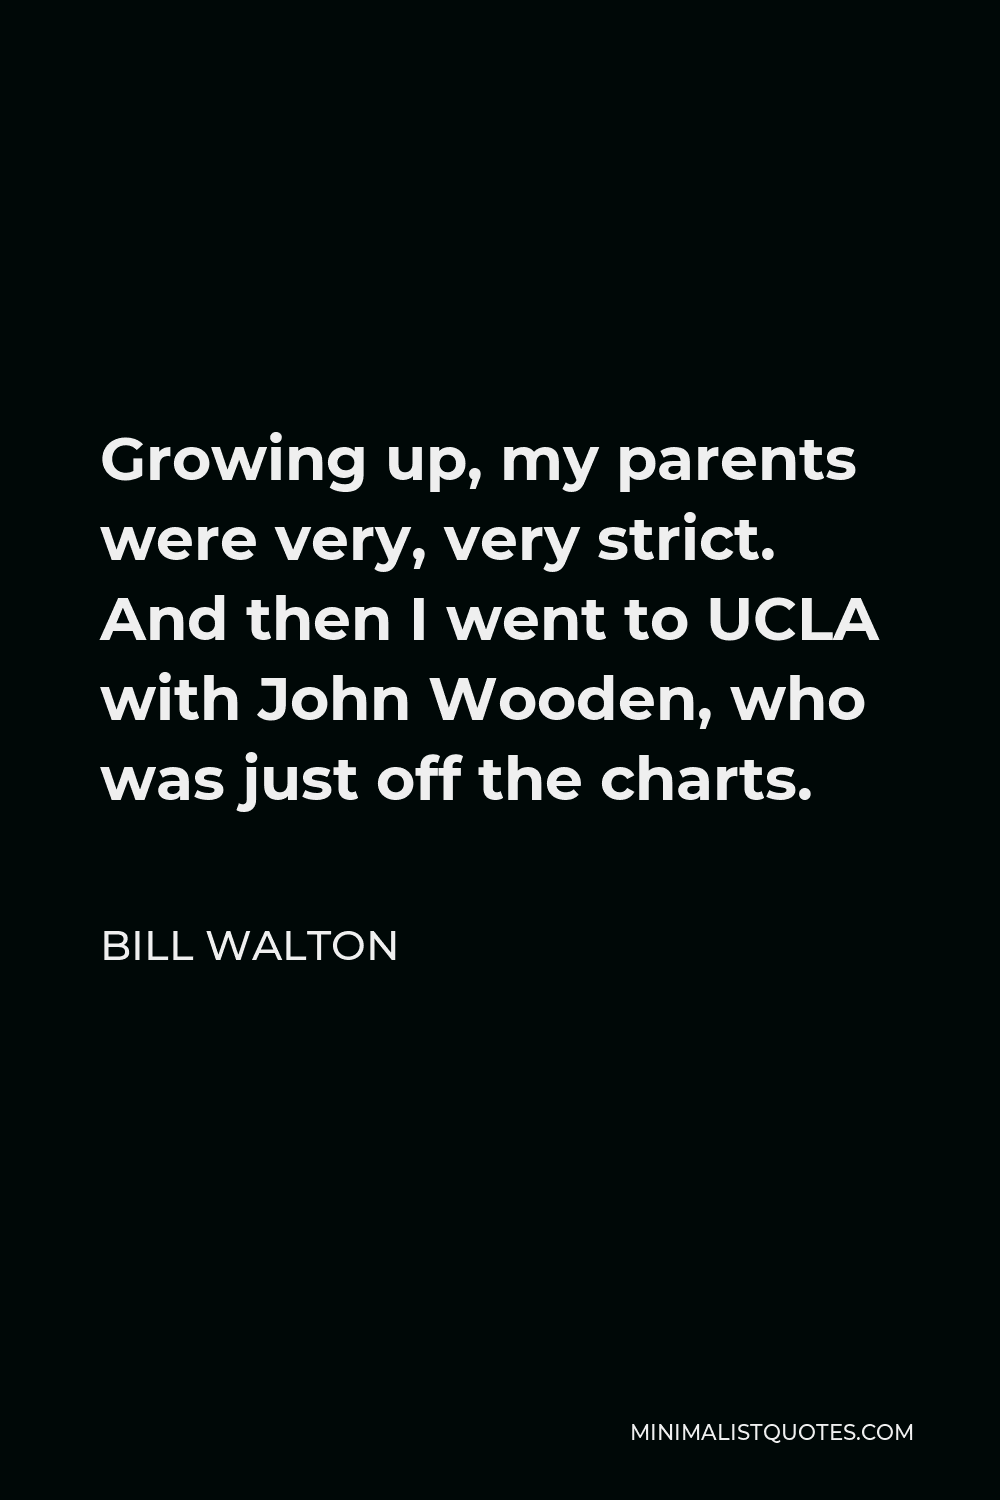 Bill Walton Quote - Growing up, my parents were very, very strict. And then I went to UCLA with John Wooden, who was just off the charts.